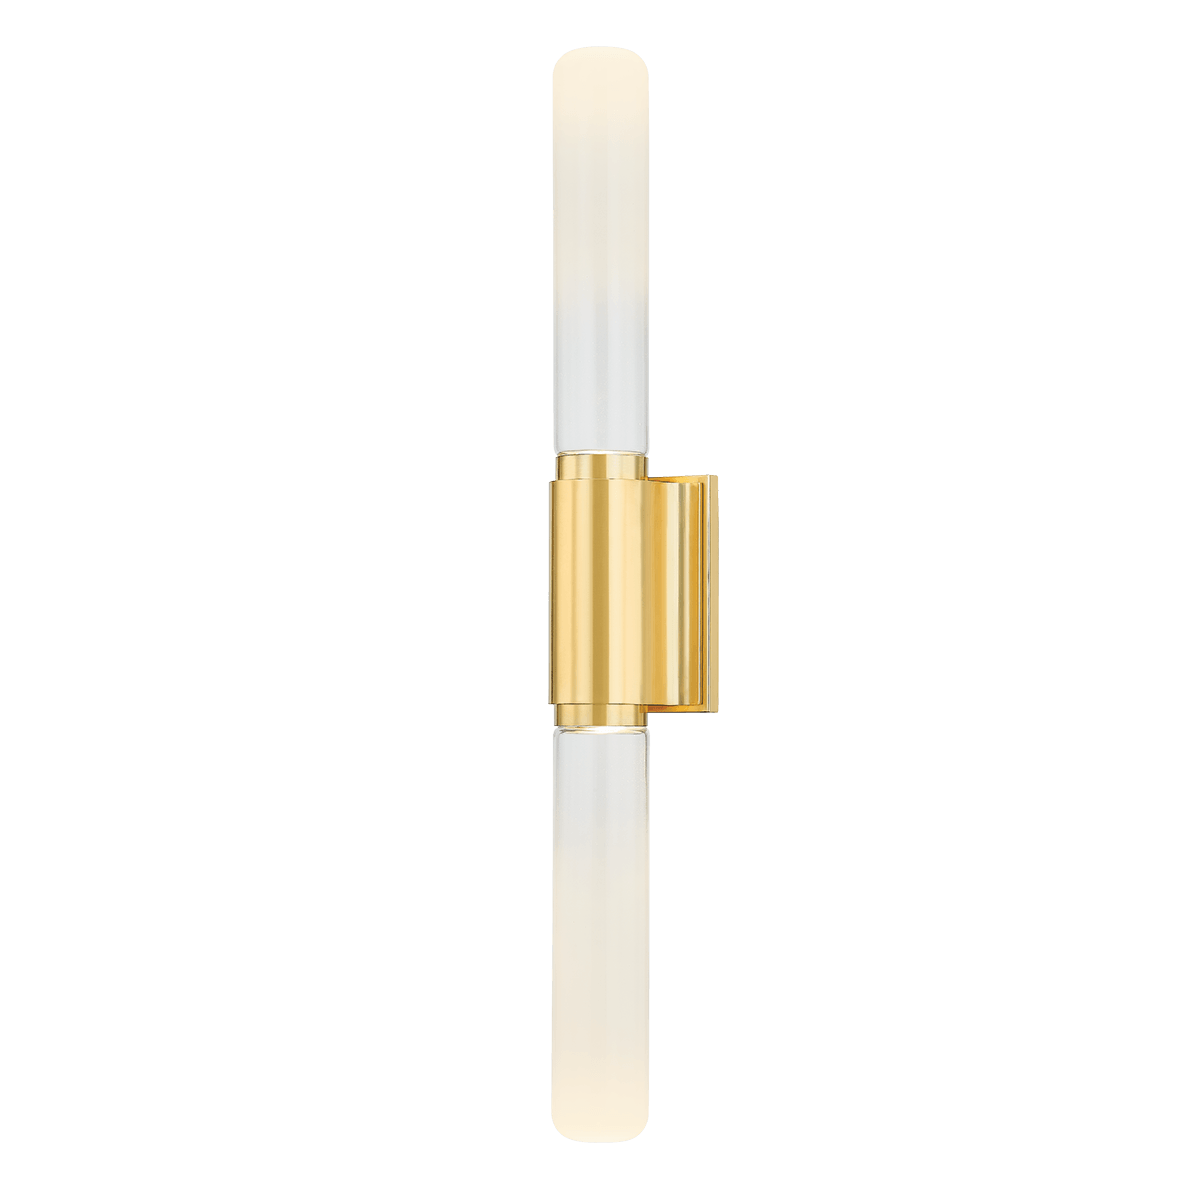 Hudson Valley Lighting - Colrain Wall Sconce - 4842-AGB | Montreal Lighting & Hardware